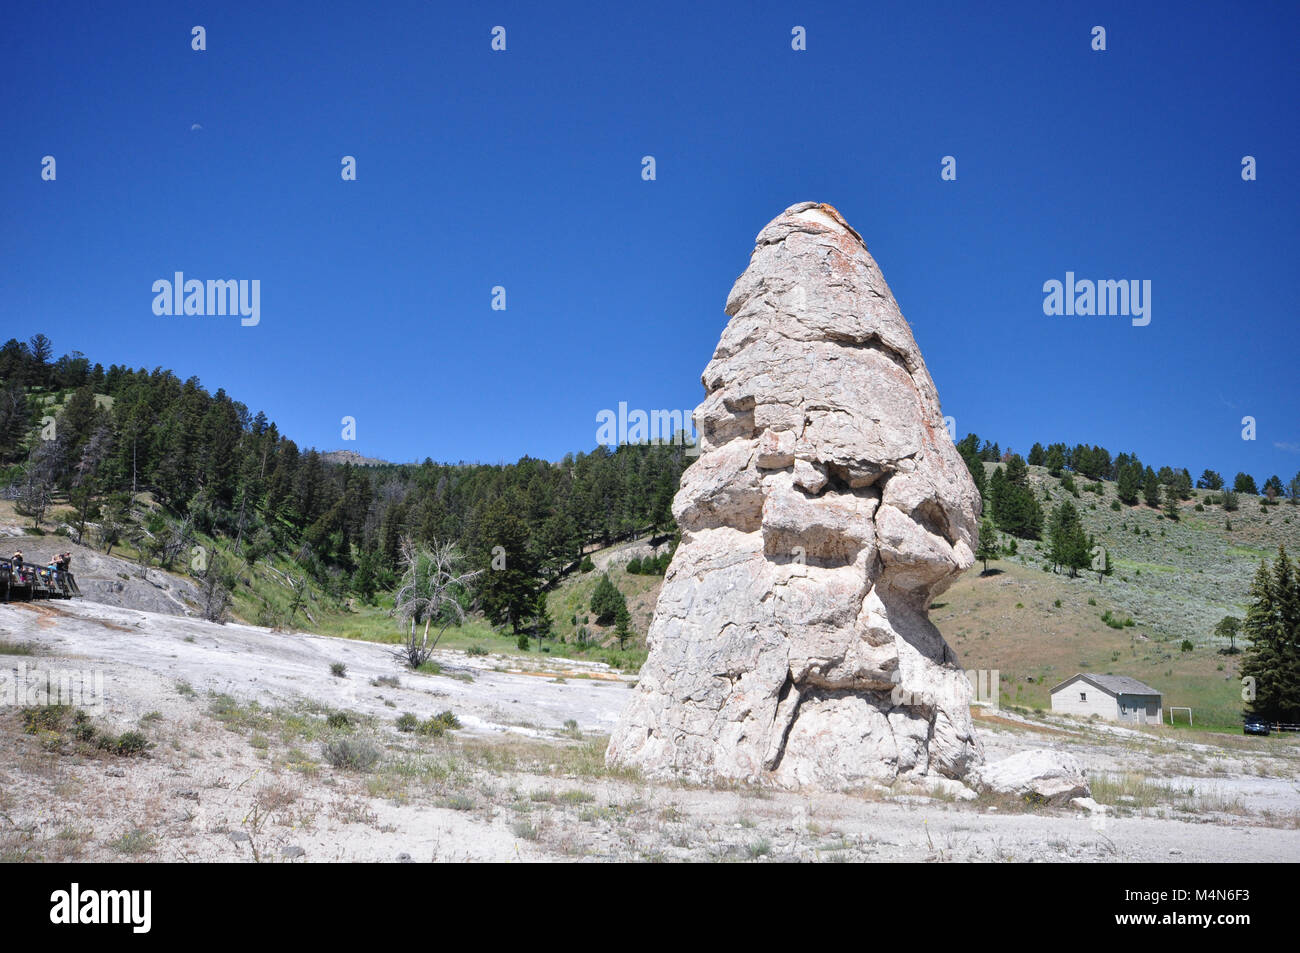 Liberty Cap is a thermal feature at Mammoth Hot Springs, hot springs complex on a hill of travertine in Yellowstone National Park, Wyoming, USA. Stock Photo